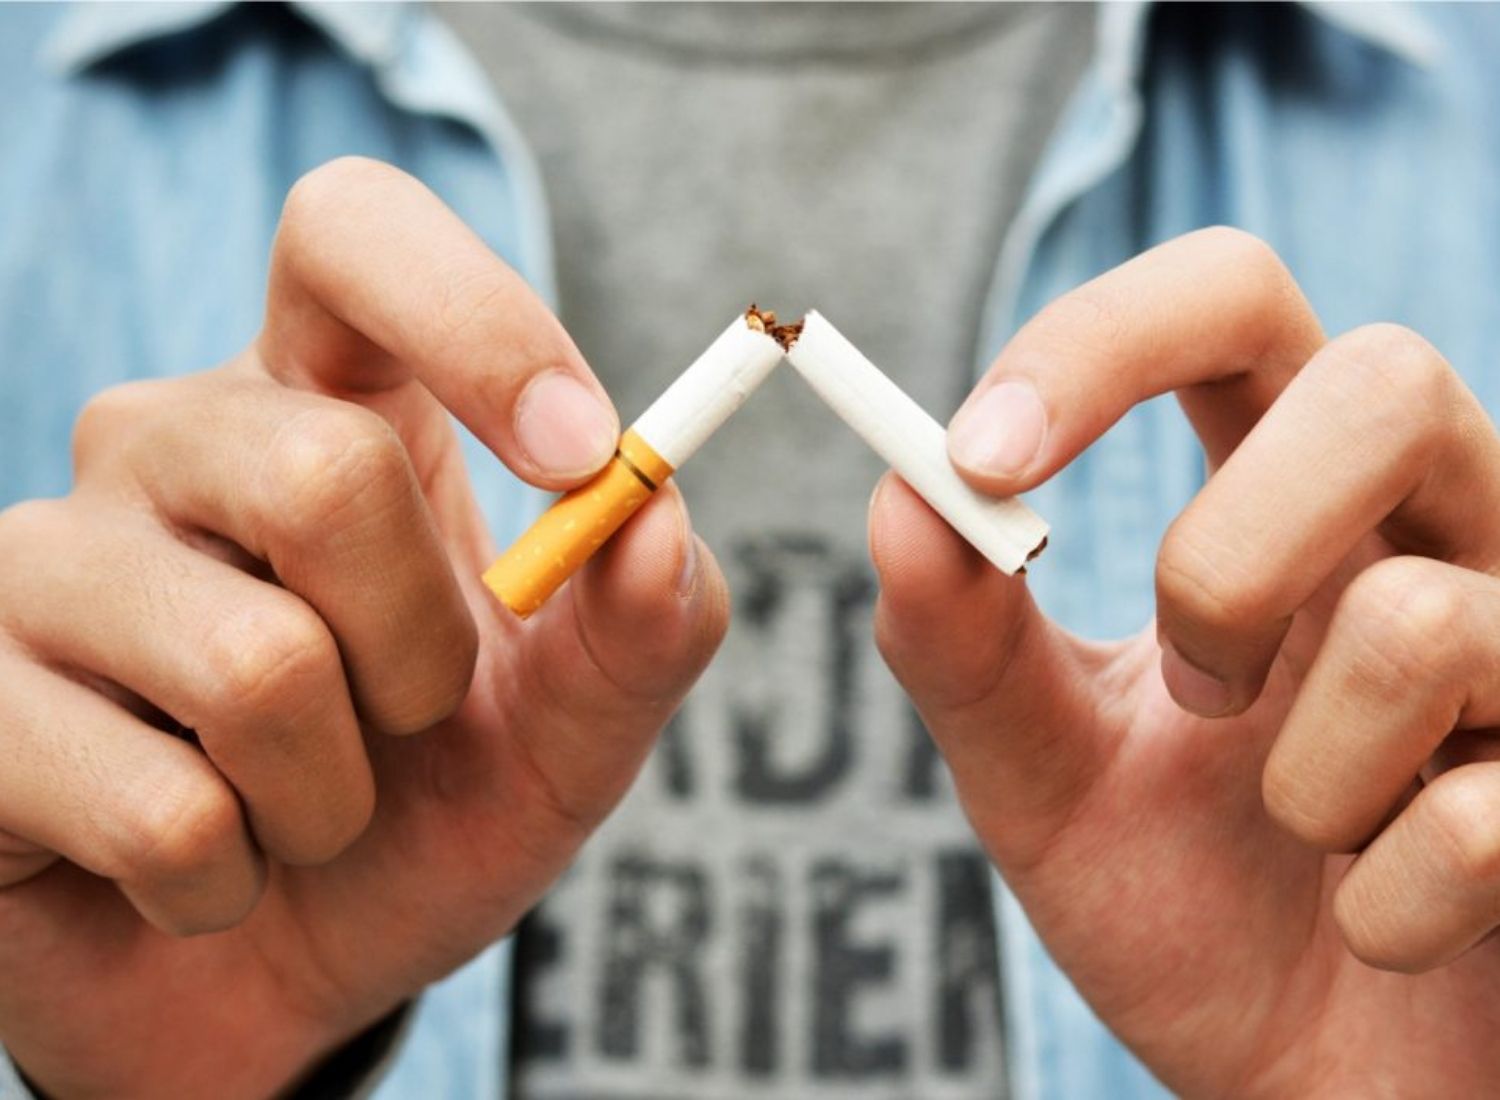 How Does Body Functions Improve When You Stop Smoking?